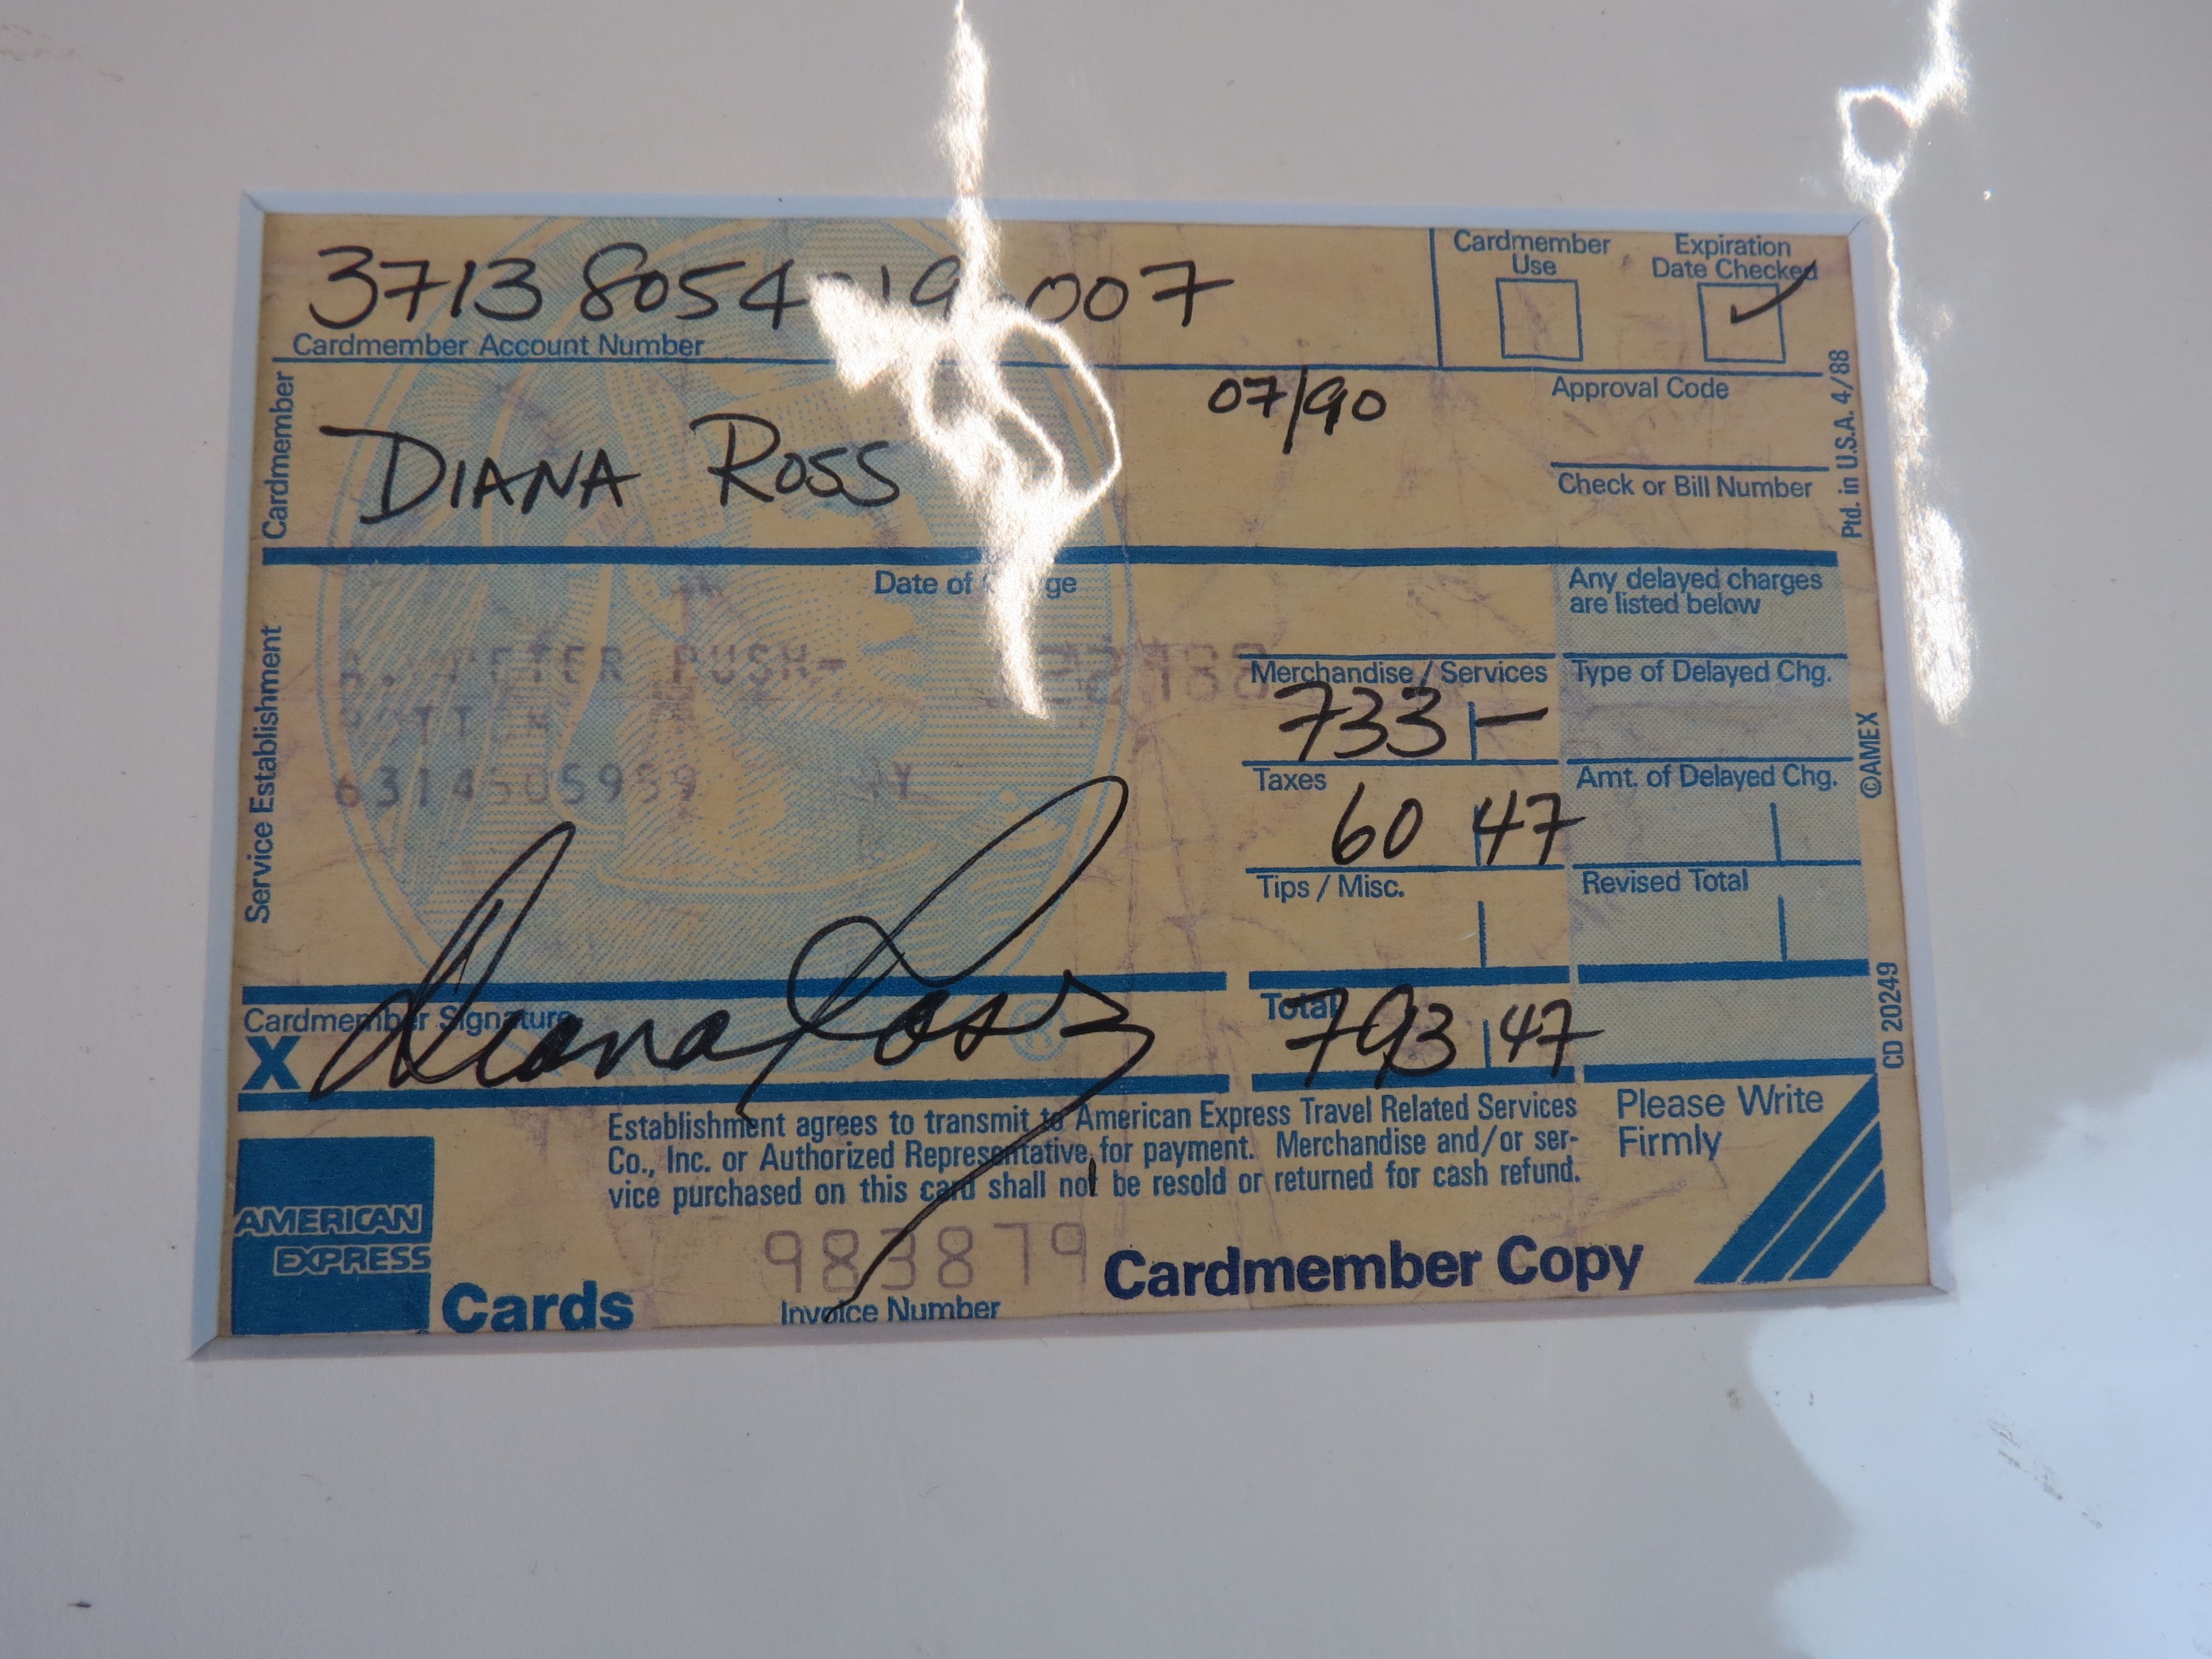 Memorabilia - Autographs - Diana Ross Amex card receipt card expiration date shown as July 1990, and - Image 2 of 3